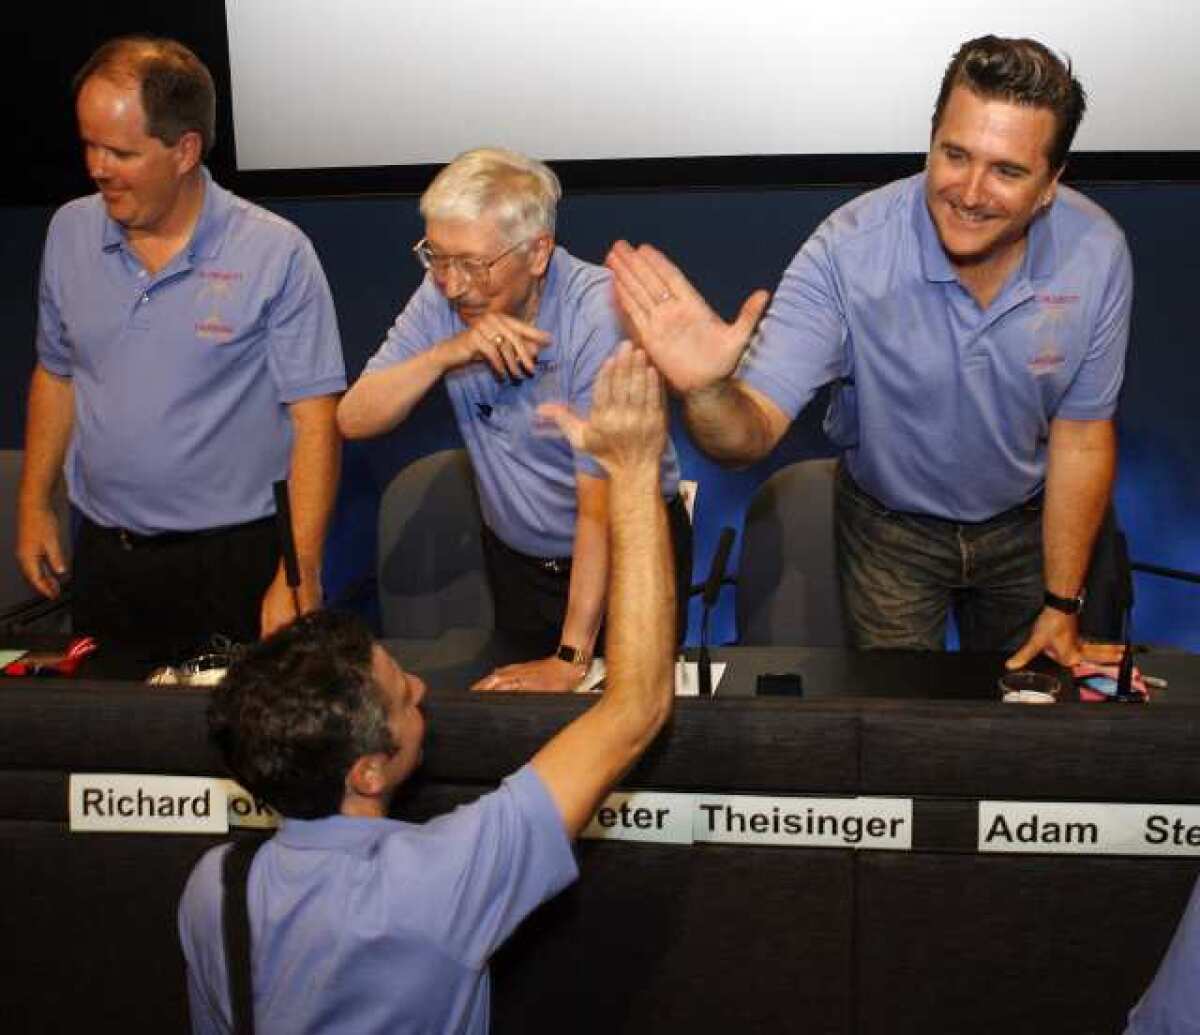 Adam Steltzner, at right, the Mars Science Laboratory entry, descent and landing phase lead, gives a high five to one of the engineers who were part of the mission at JPL at the post-landing press conference.